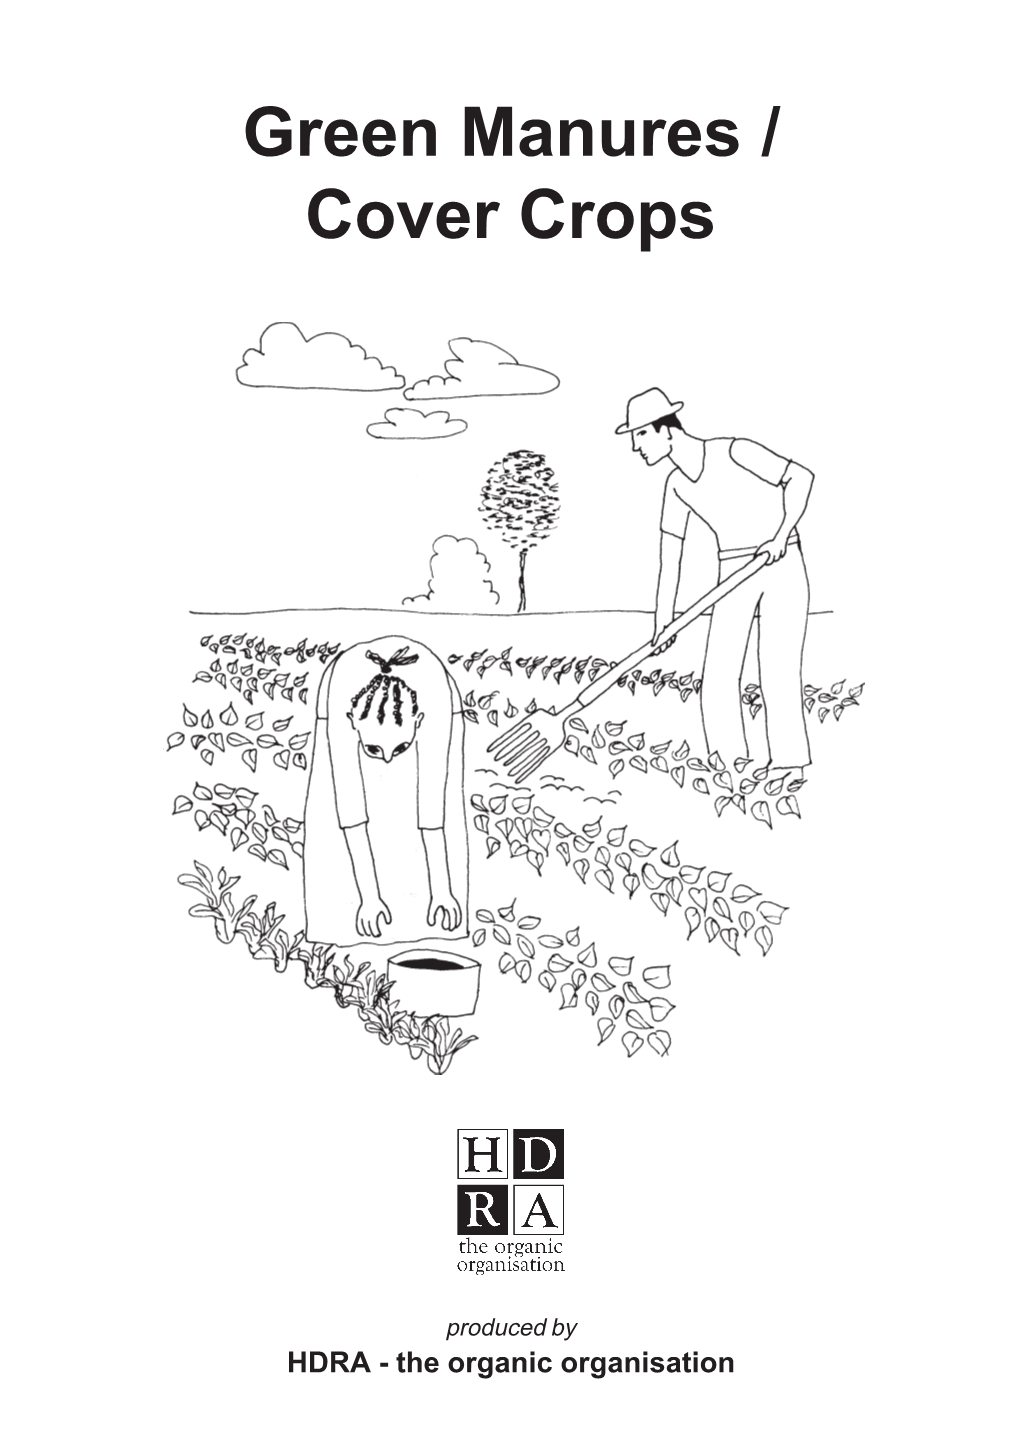 Green Manures / Cover Crops